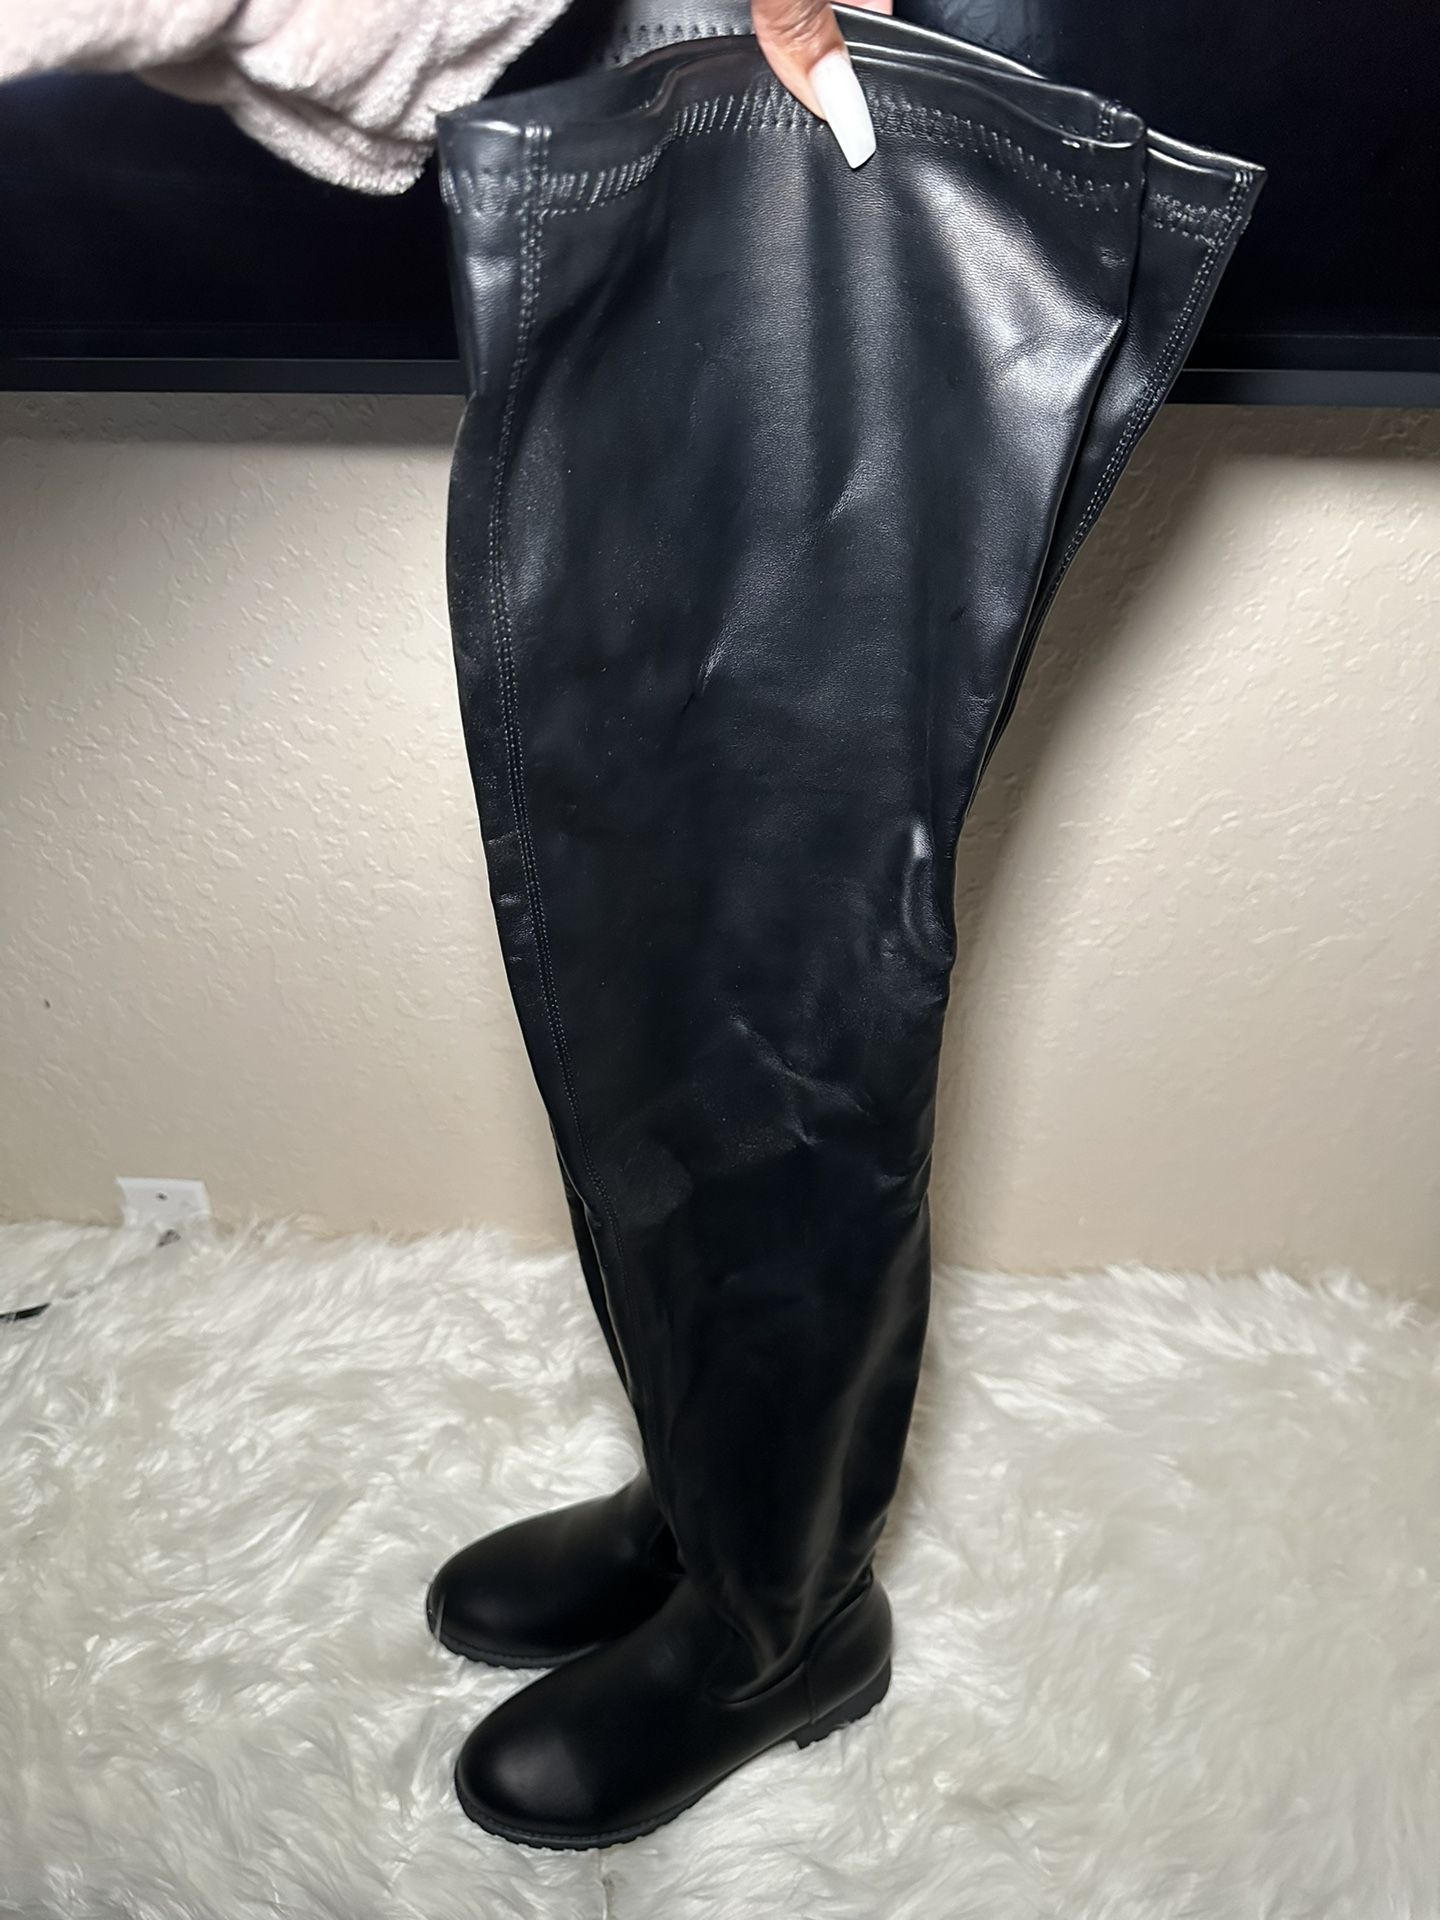 Black Thigh High Boots Size 9